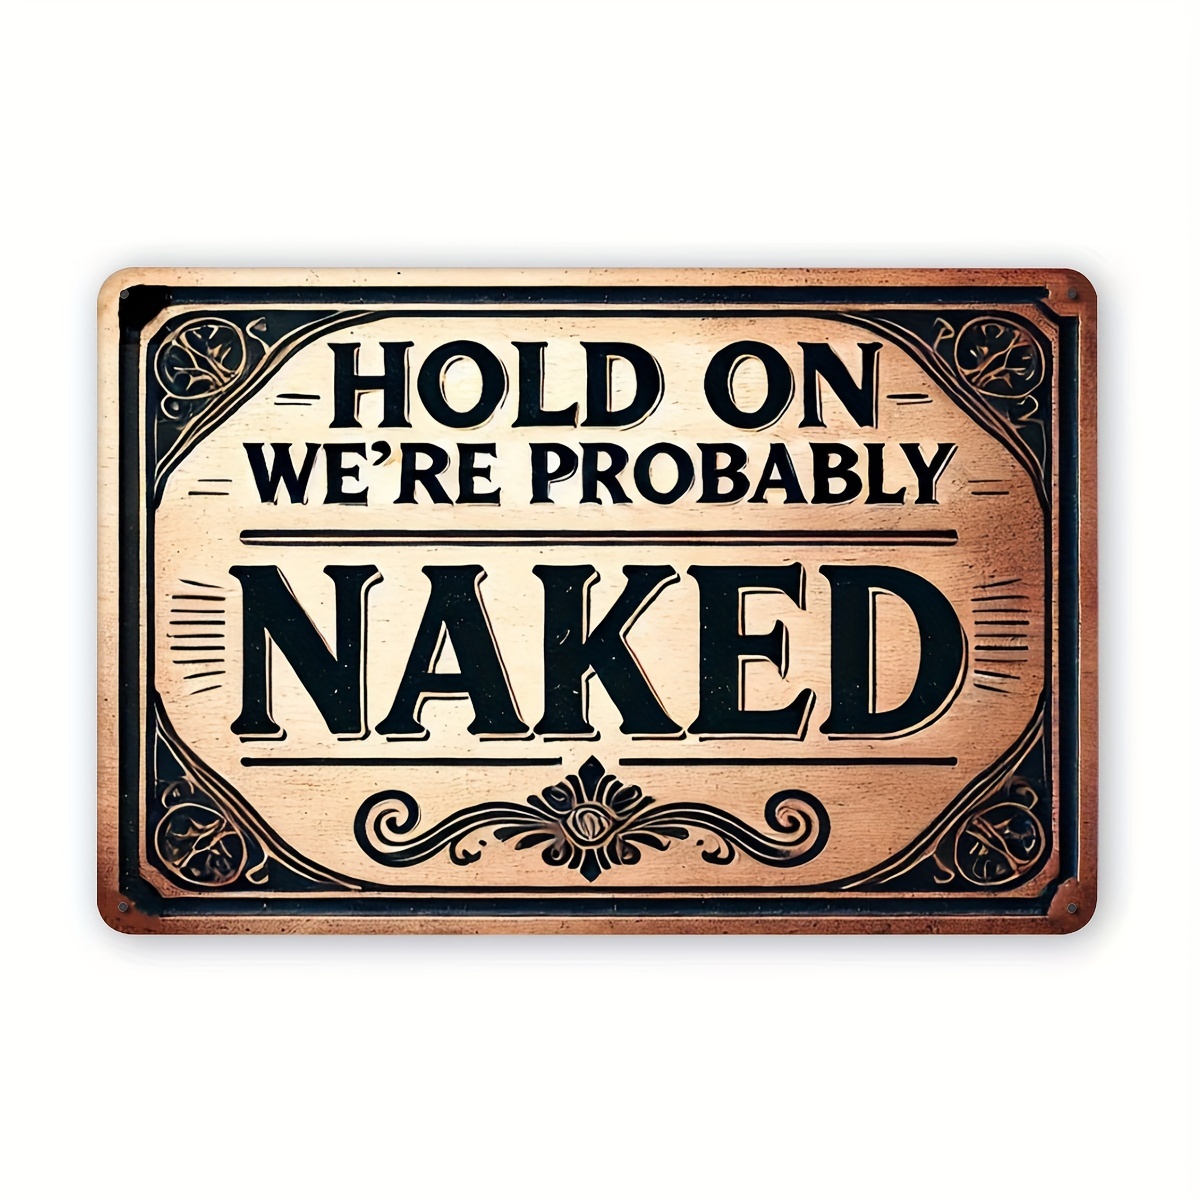 

hold On We're Probably Naked" Vintage Metal Warning Sign - 8x12 Inch | Perfect For Home, Bar, Restaurant Decor | Fun Tin Wall Art